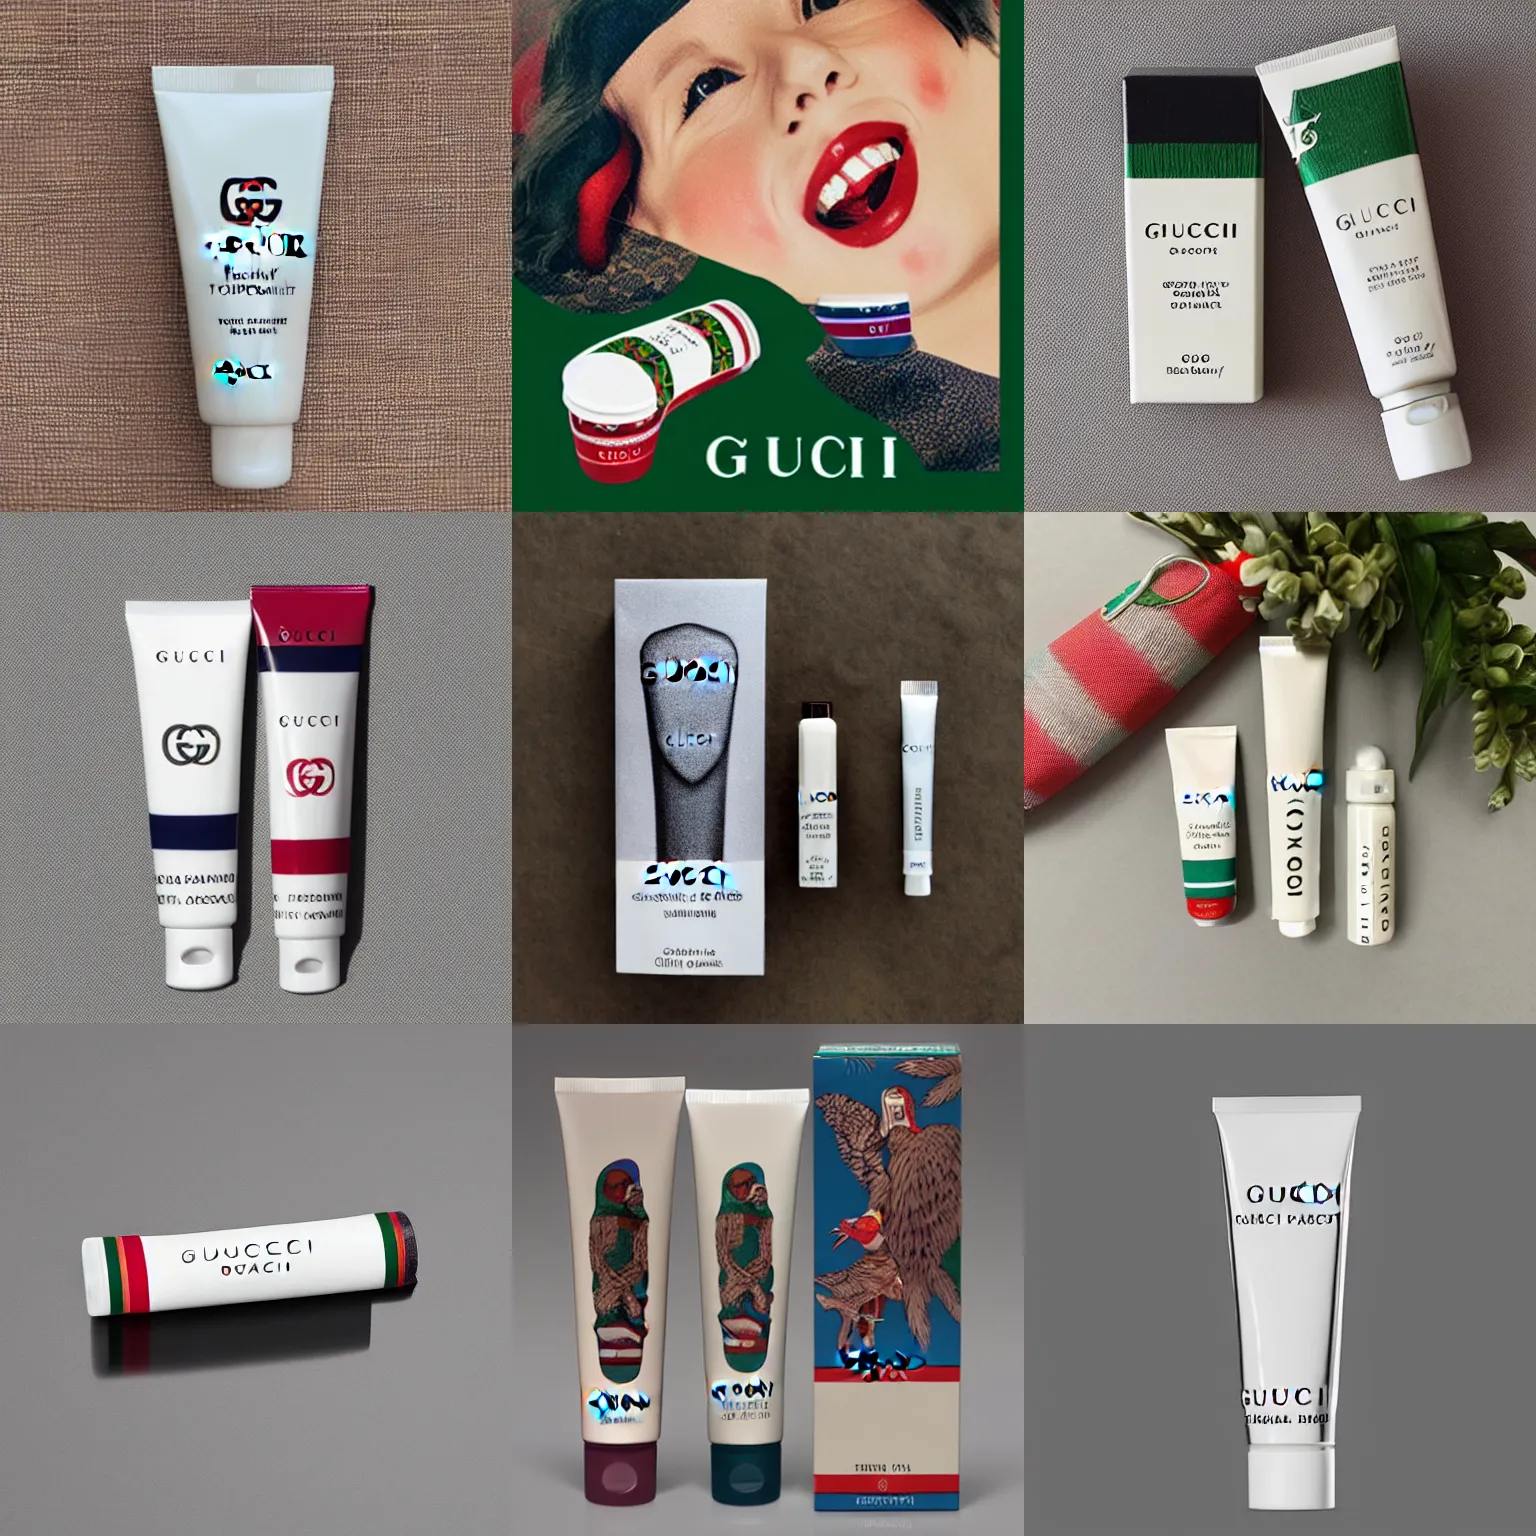 gucci toothpaste | Stable Diffusion